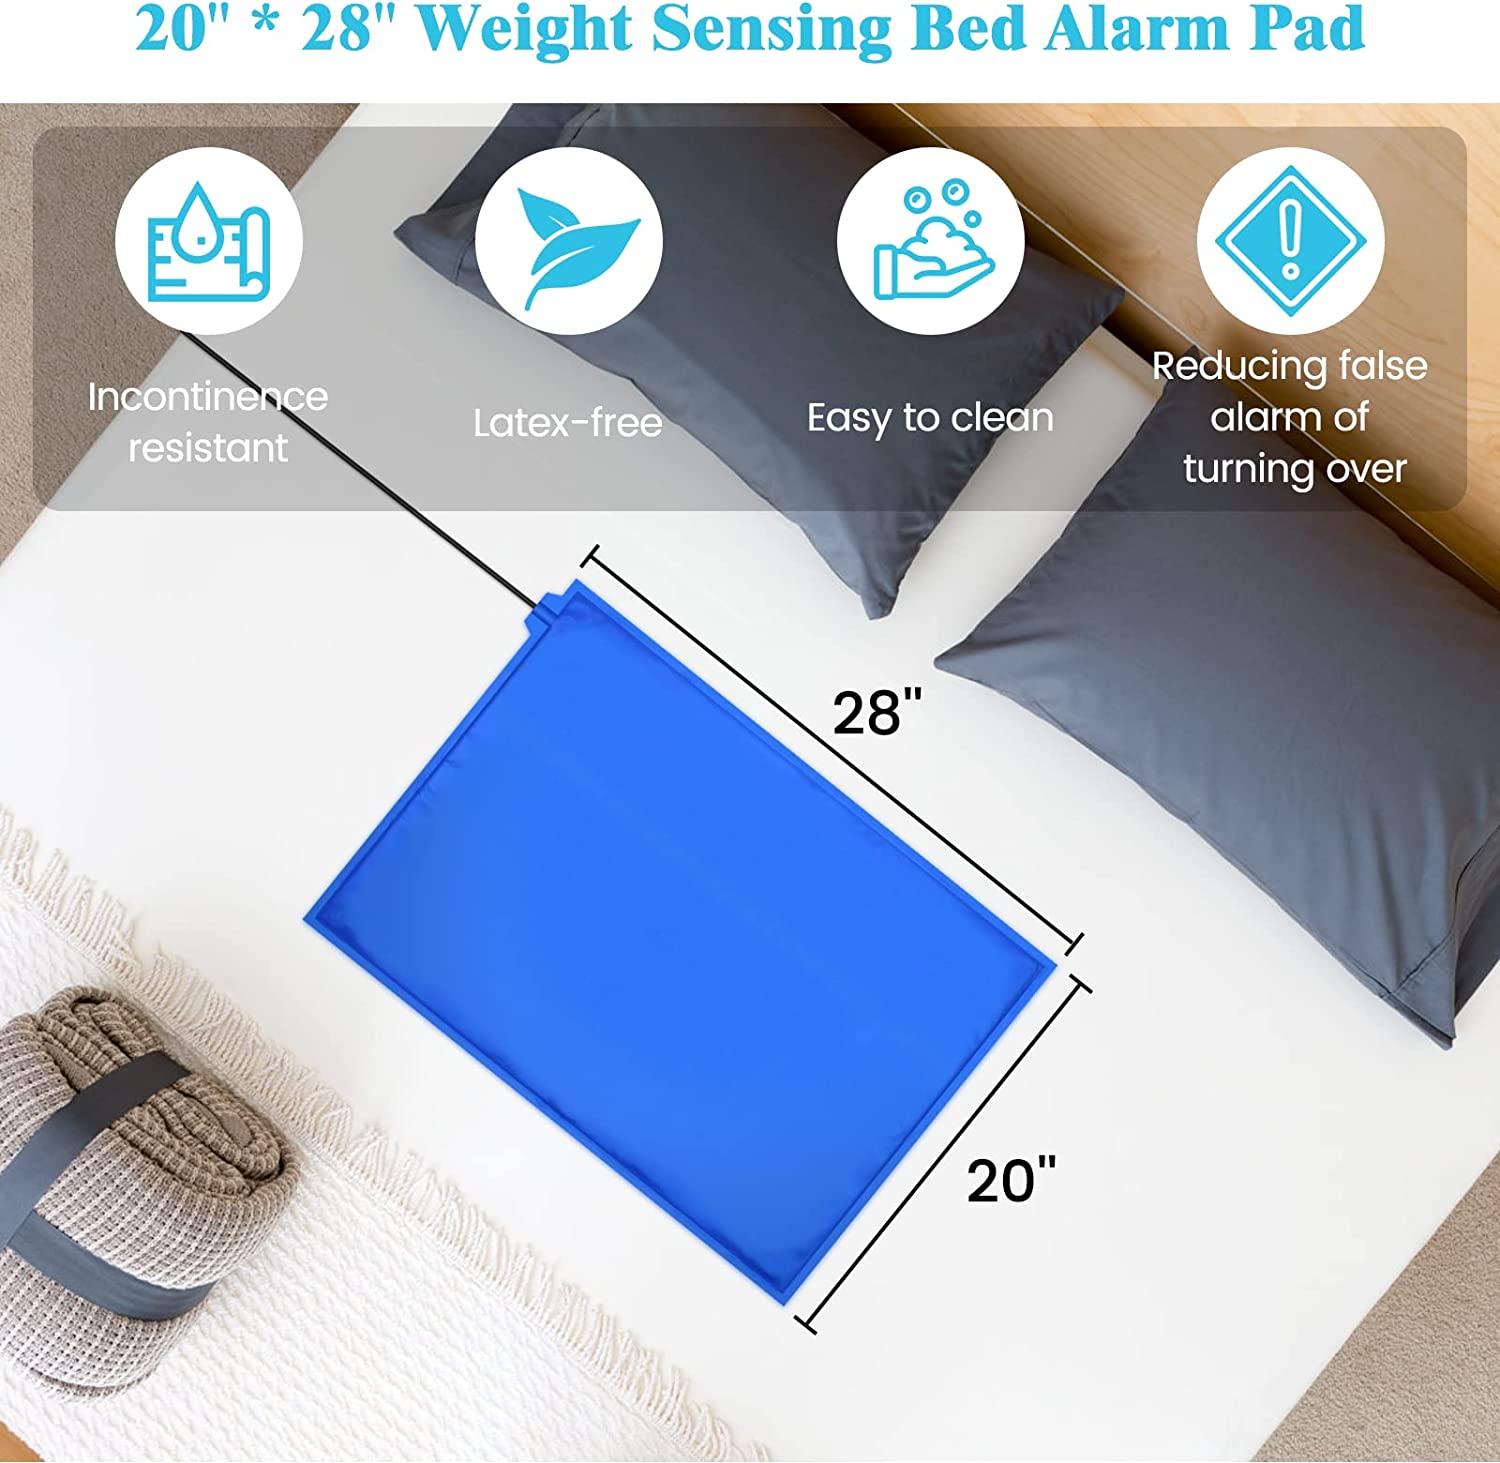 briidea Bed Alarms and Fall Prevention for Elderly with 20'' * 28'' Weight Sensing Bed Pad (Wireless Alarm Included) - briidea